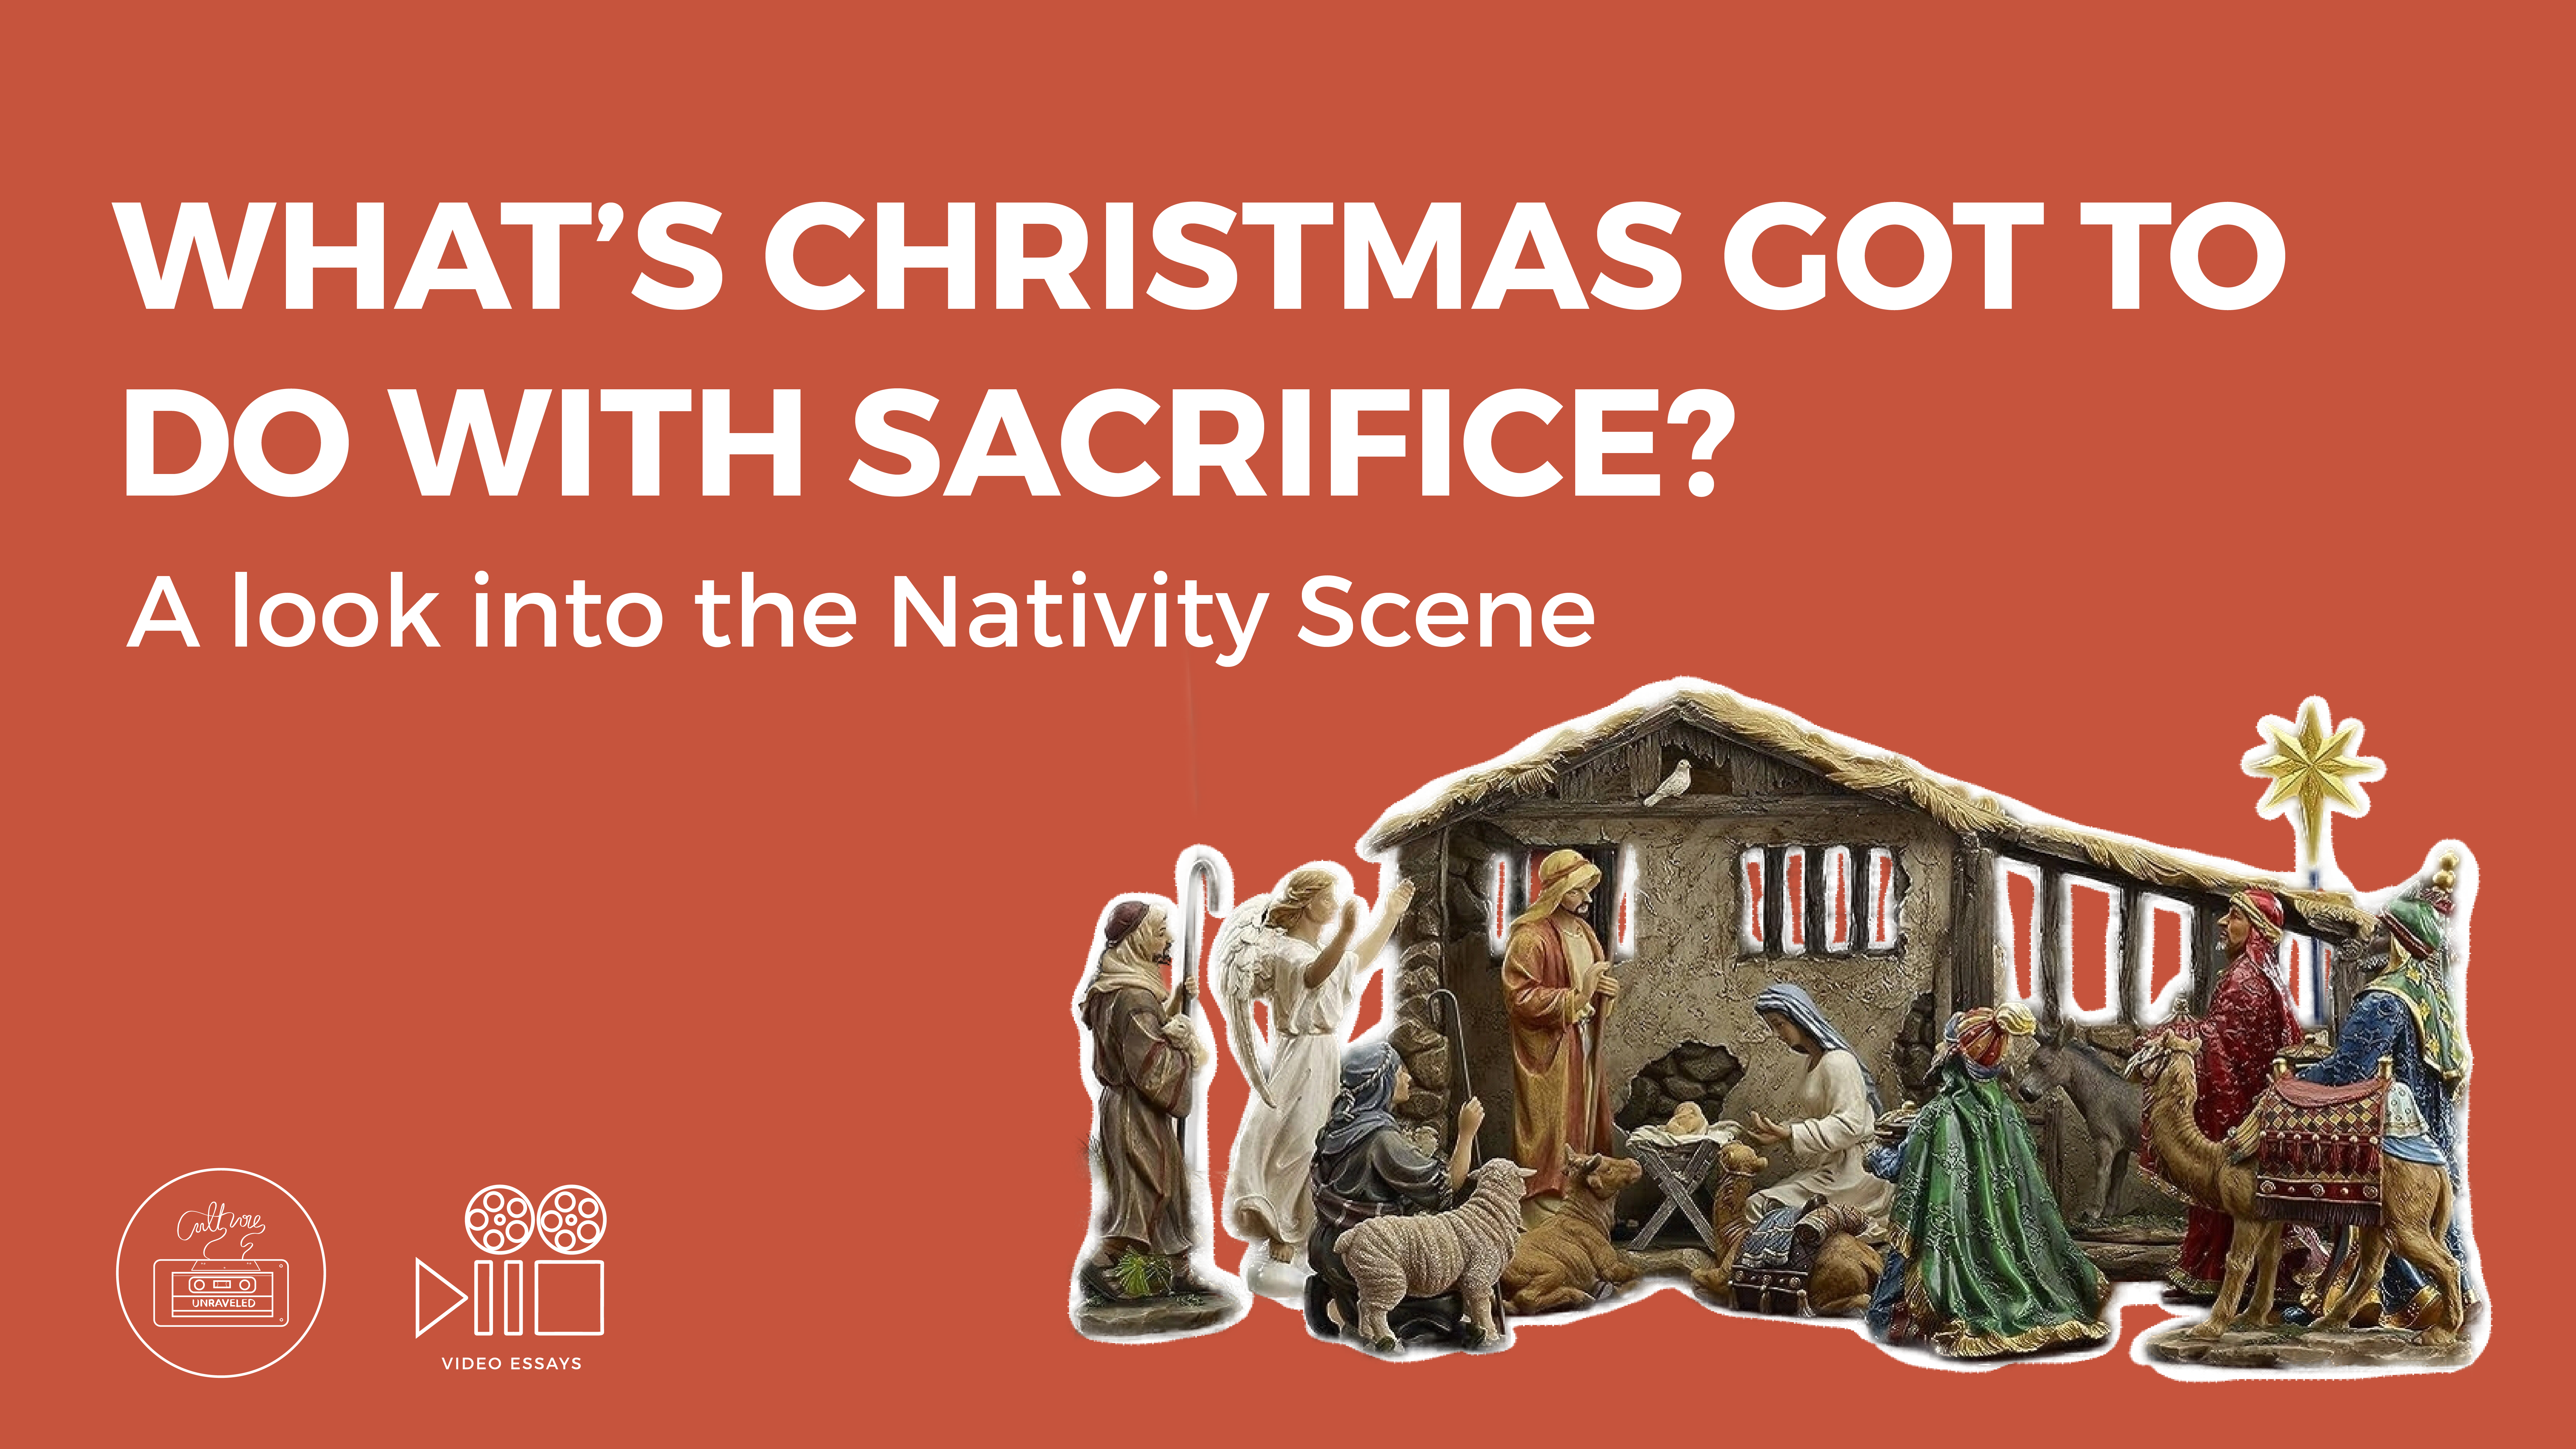 What’s Christmas got to do with Sacrifice? A Look into the Nativity Scene